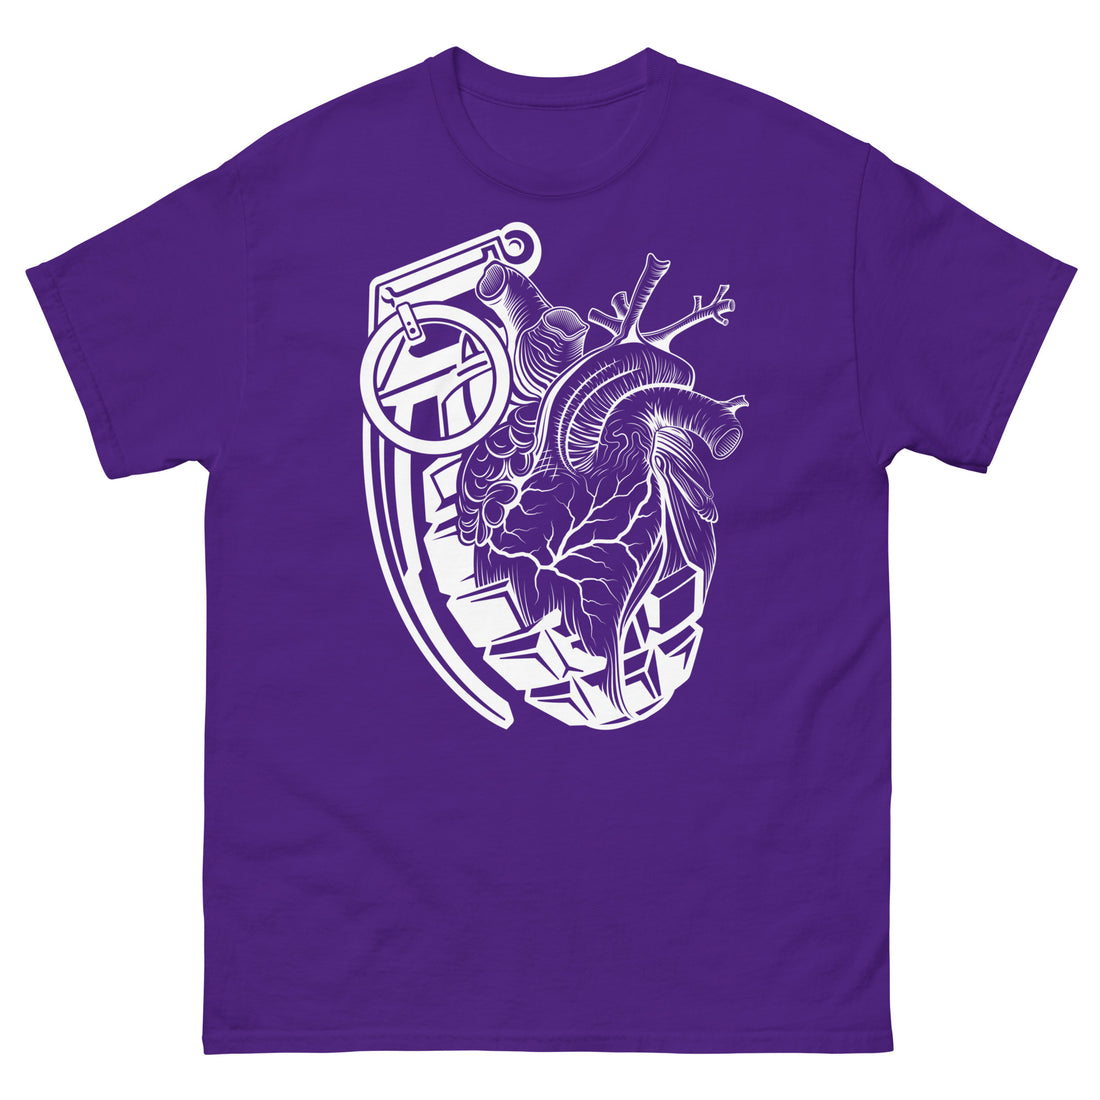 A purple  t-shirt with a white grenade of sold color and line work morphing into an anatomical heart drawn using line work for shading at the top right of the image.